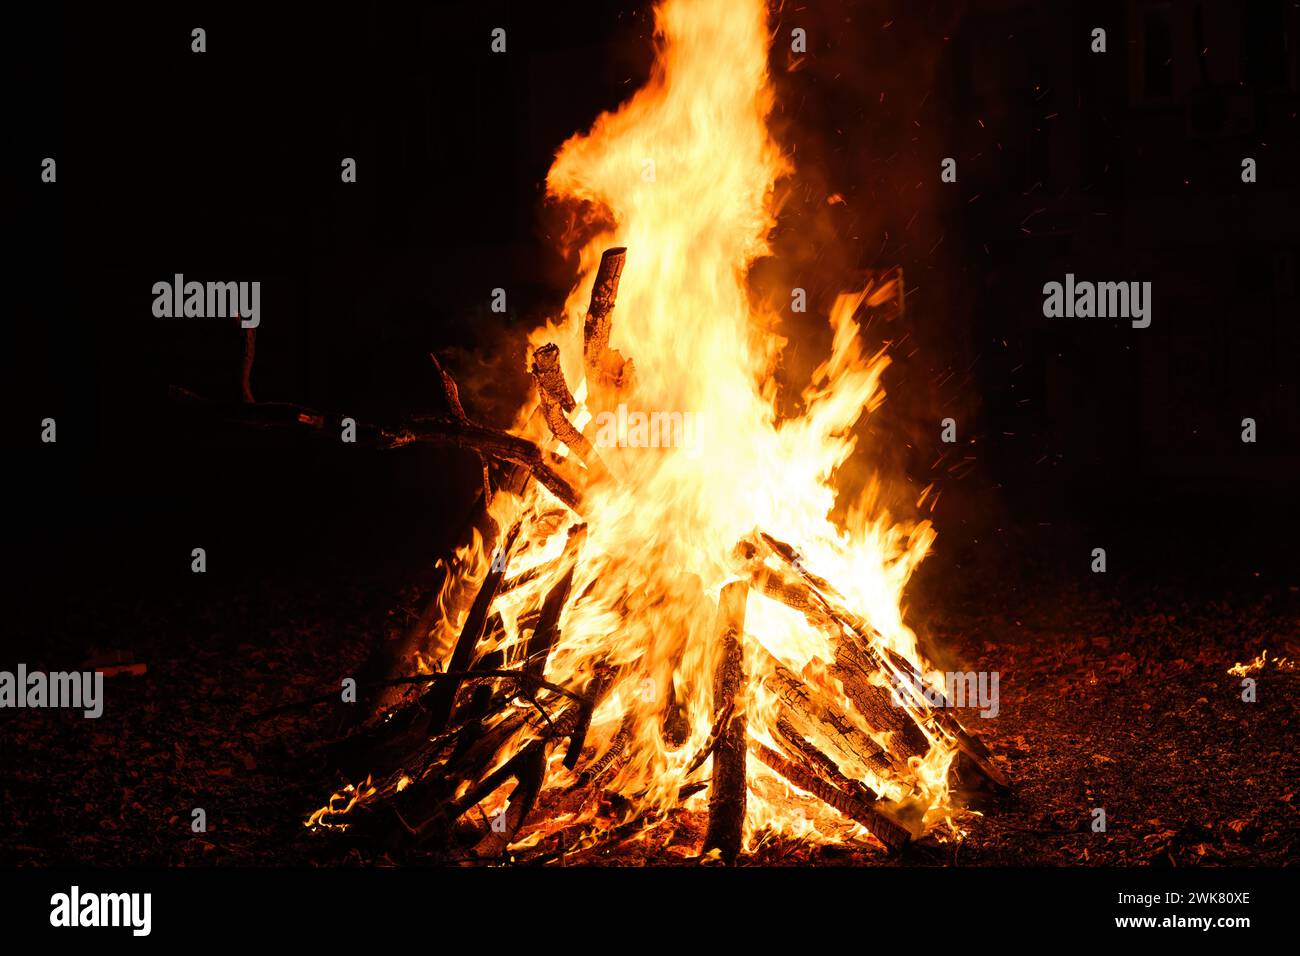 Bonfire burning at night, bright orange flames of fire, selective focus Stock Photo